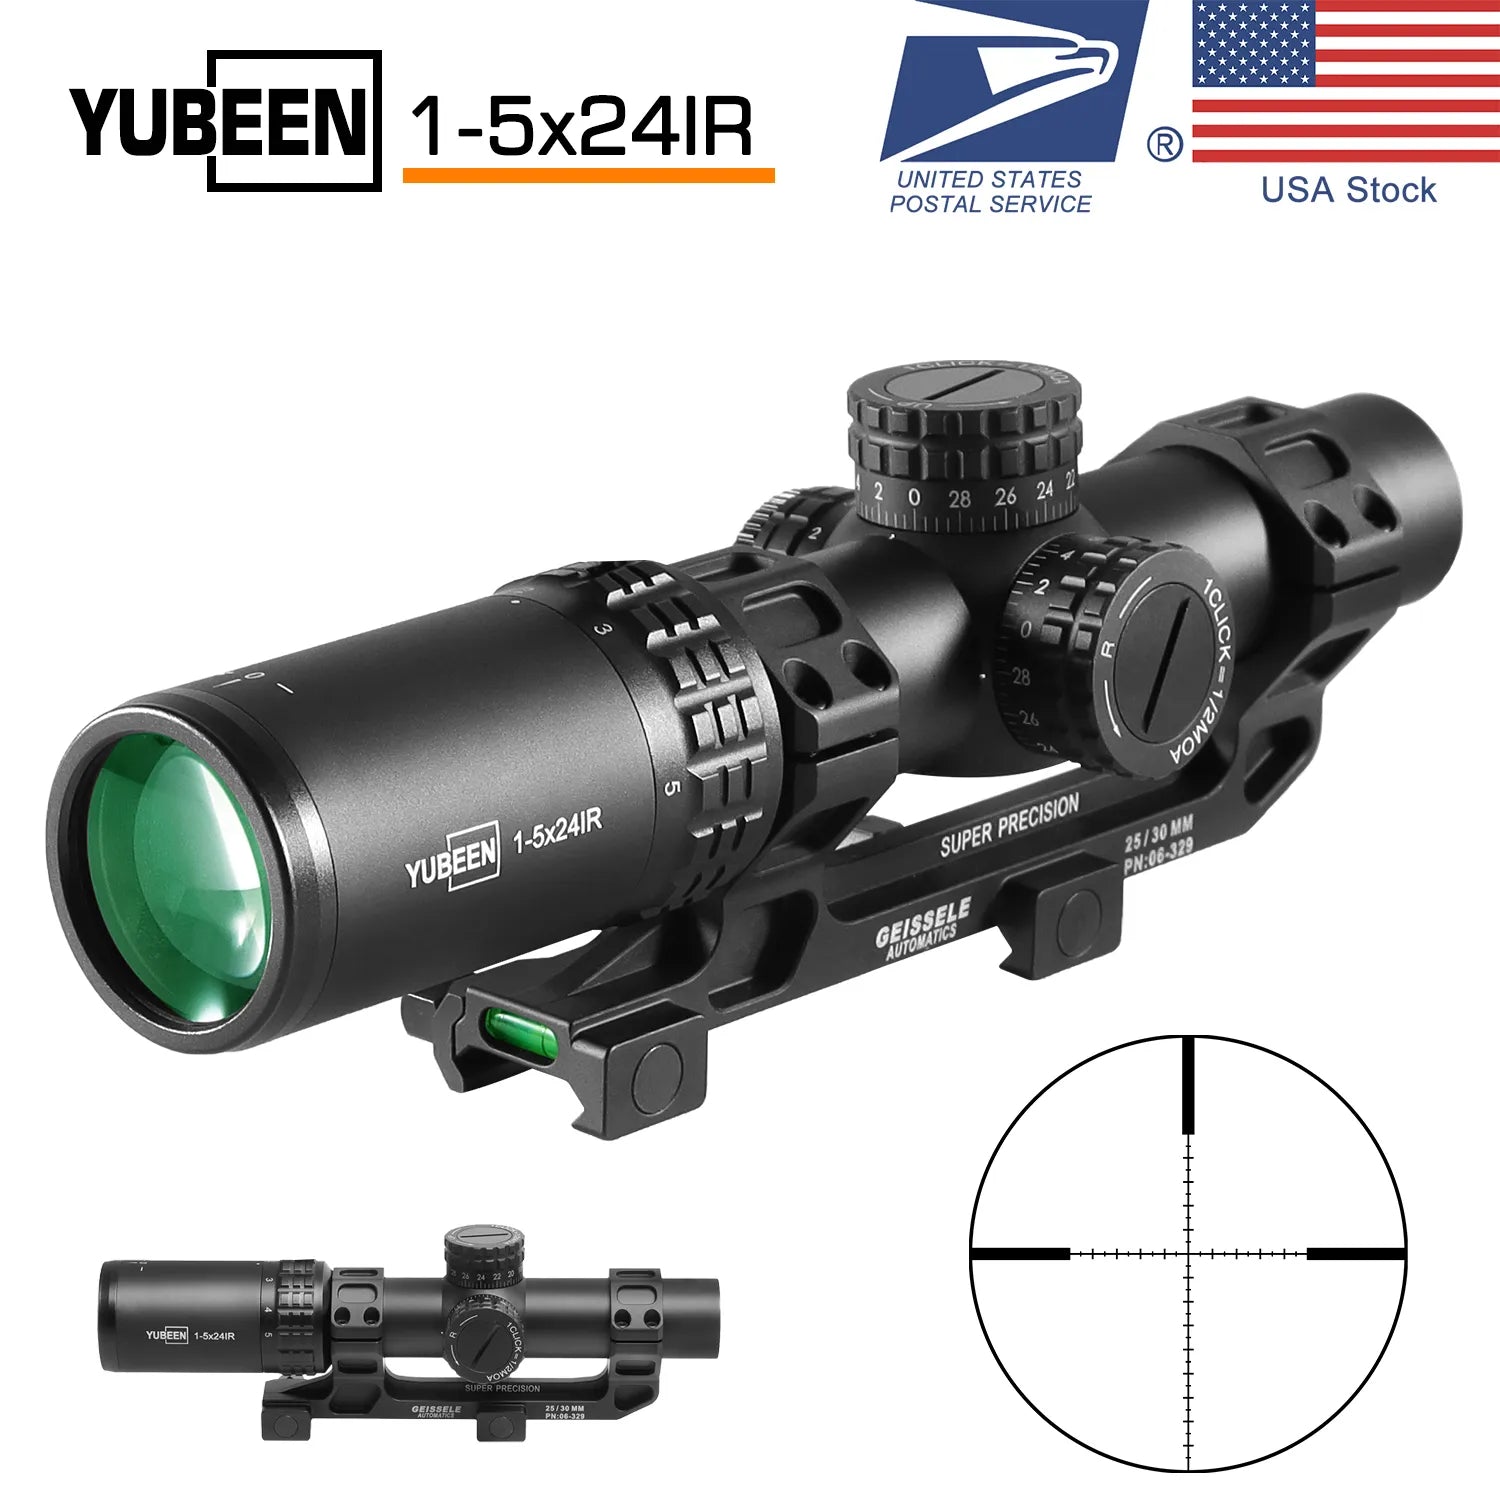 YUBEEN 1-5x24 IR Optical Red & Green Compact Hunting Scope